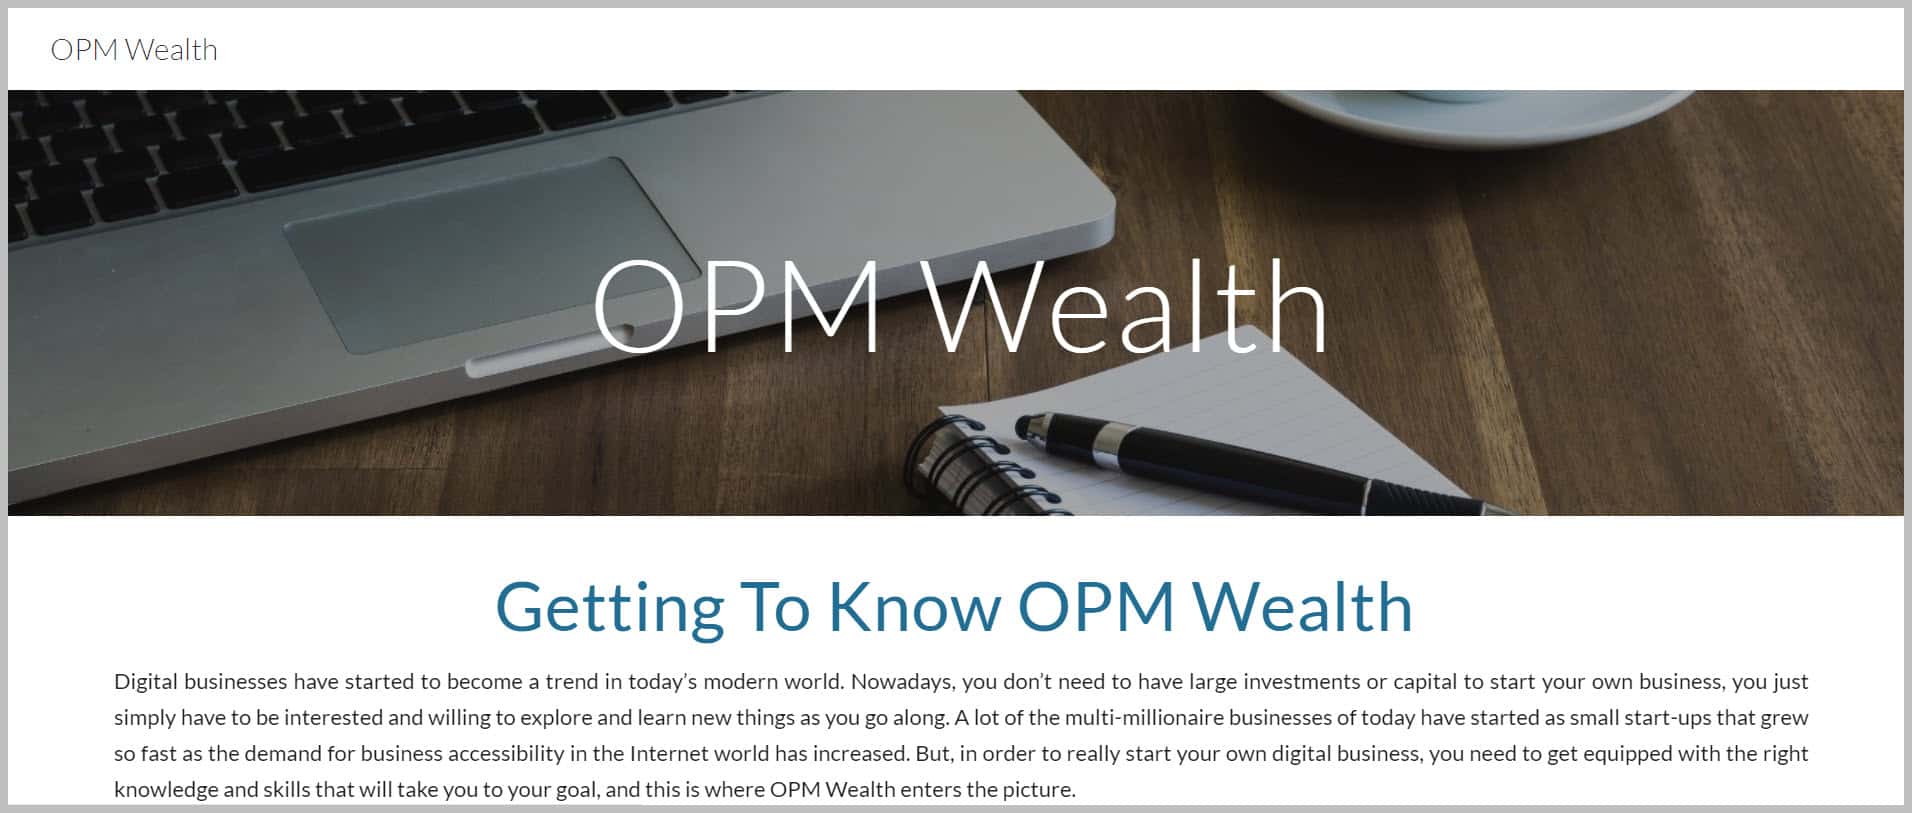 Getting To Know OPM Wealth